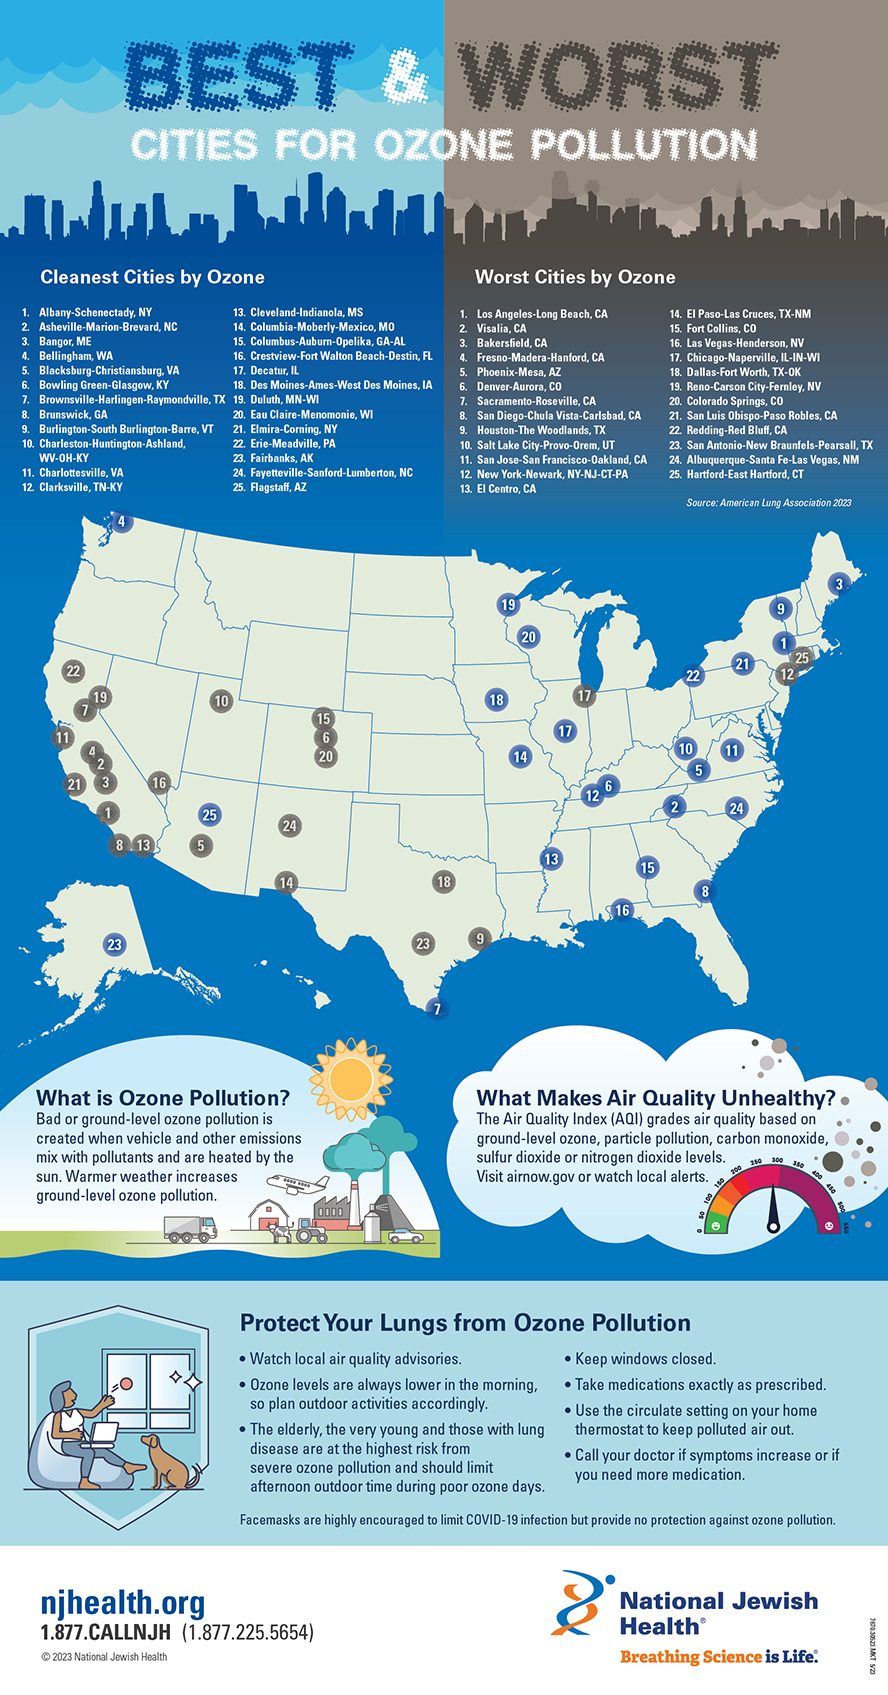 Best & Worst Cities for Ozone Pollution Infographic